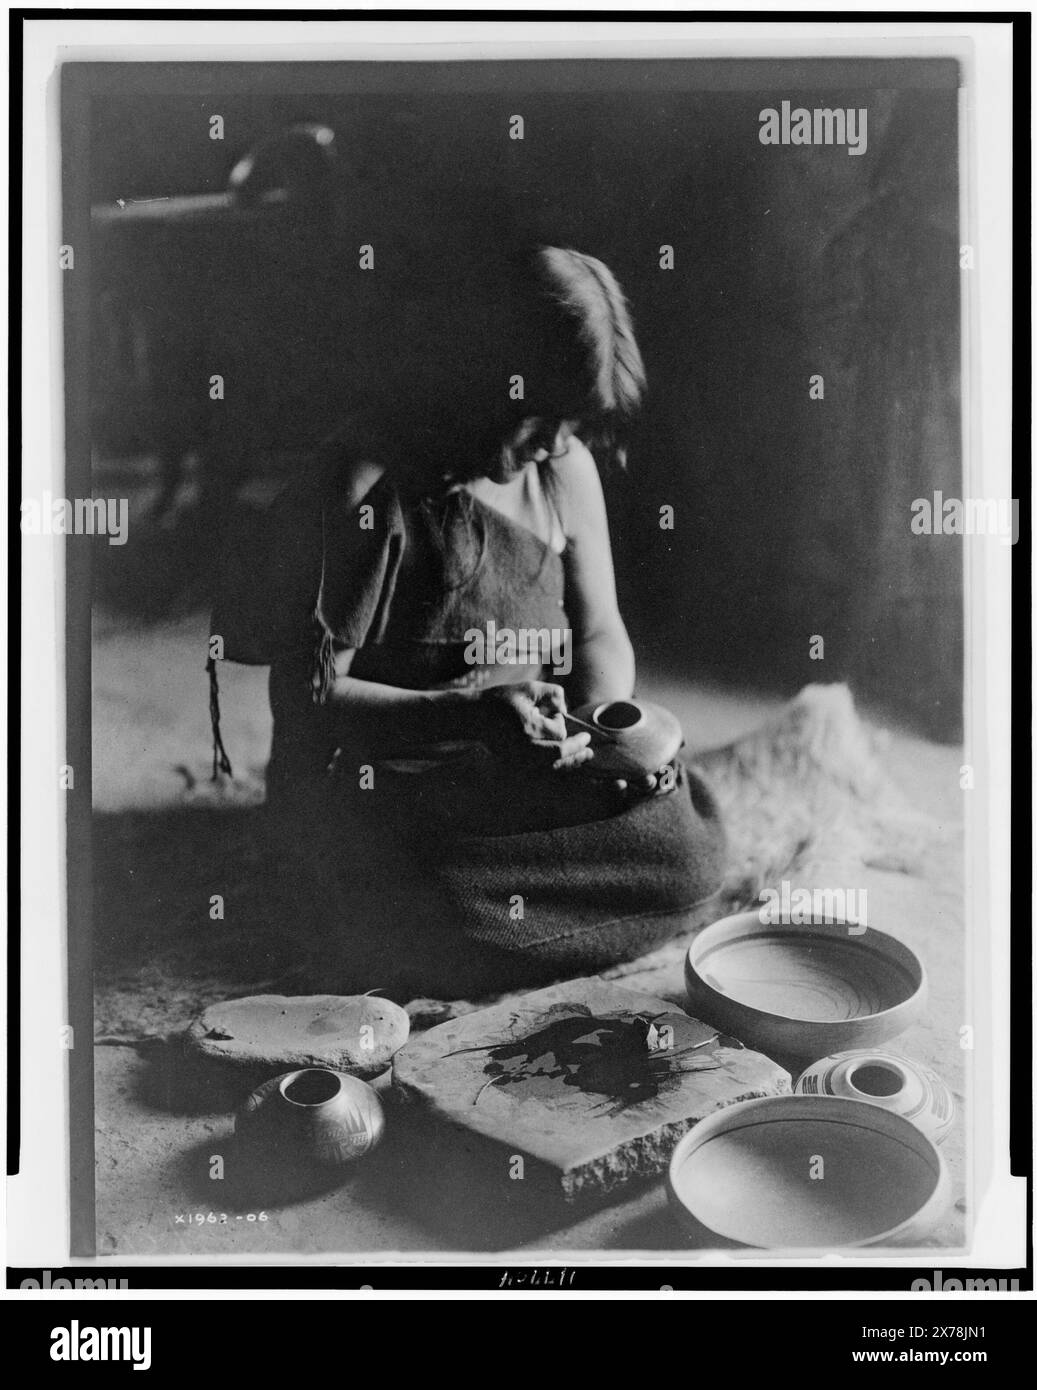 The potter, Edward S. Curtis Collection ., Curtis no. 1962-06., Published in: The North American Indian / Edward S. Curtis. [Seattle, Wash.] : Edward S. Curtis, 1907-30, Suppl. v. 12, pl. 426.. Indians of North America, Arts & crafts, 1900-1910. , Hopi Indians, Arts & crafts, 1900-1910. , Pottery, 1900-1910. Stock Photo